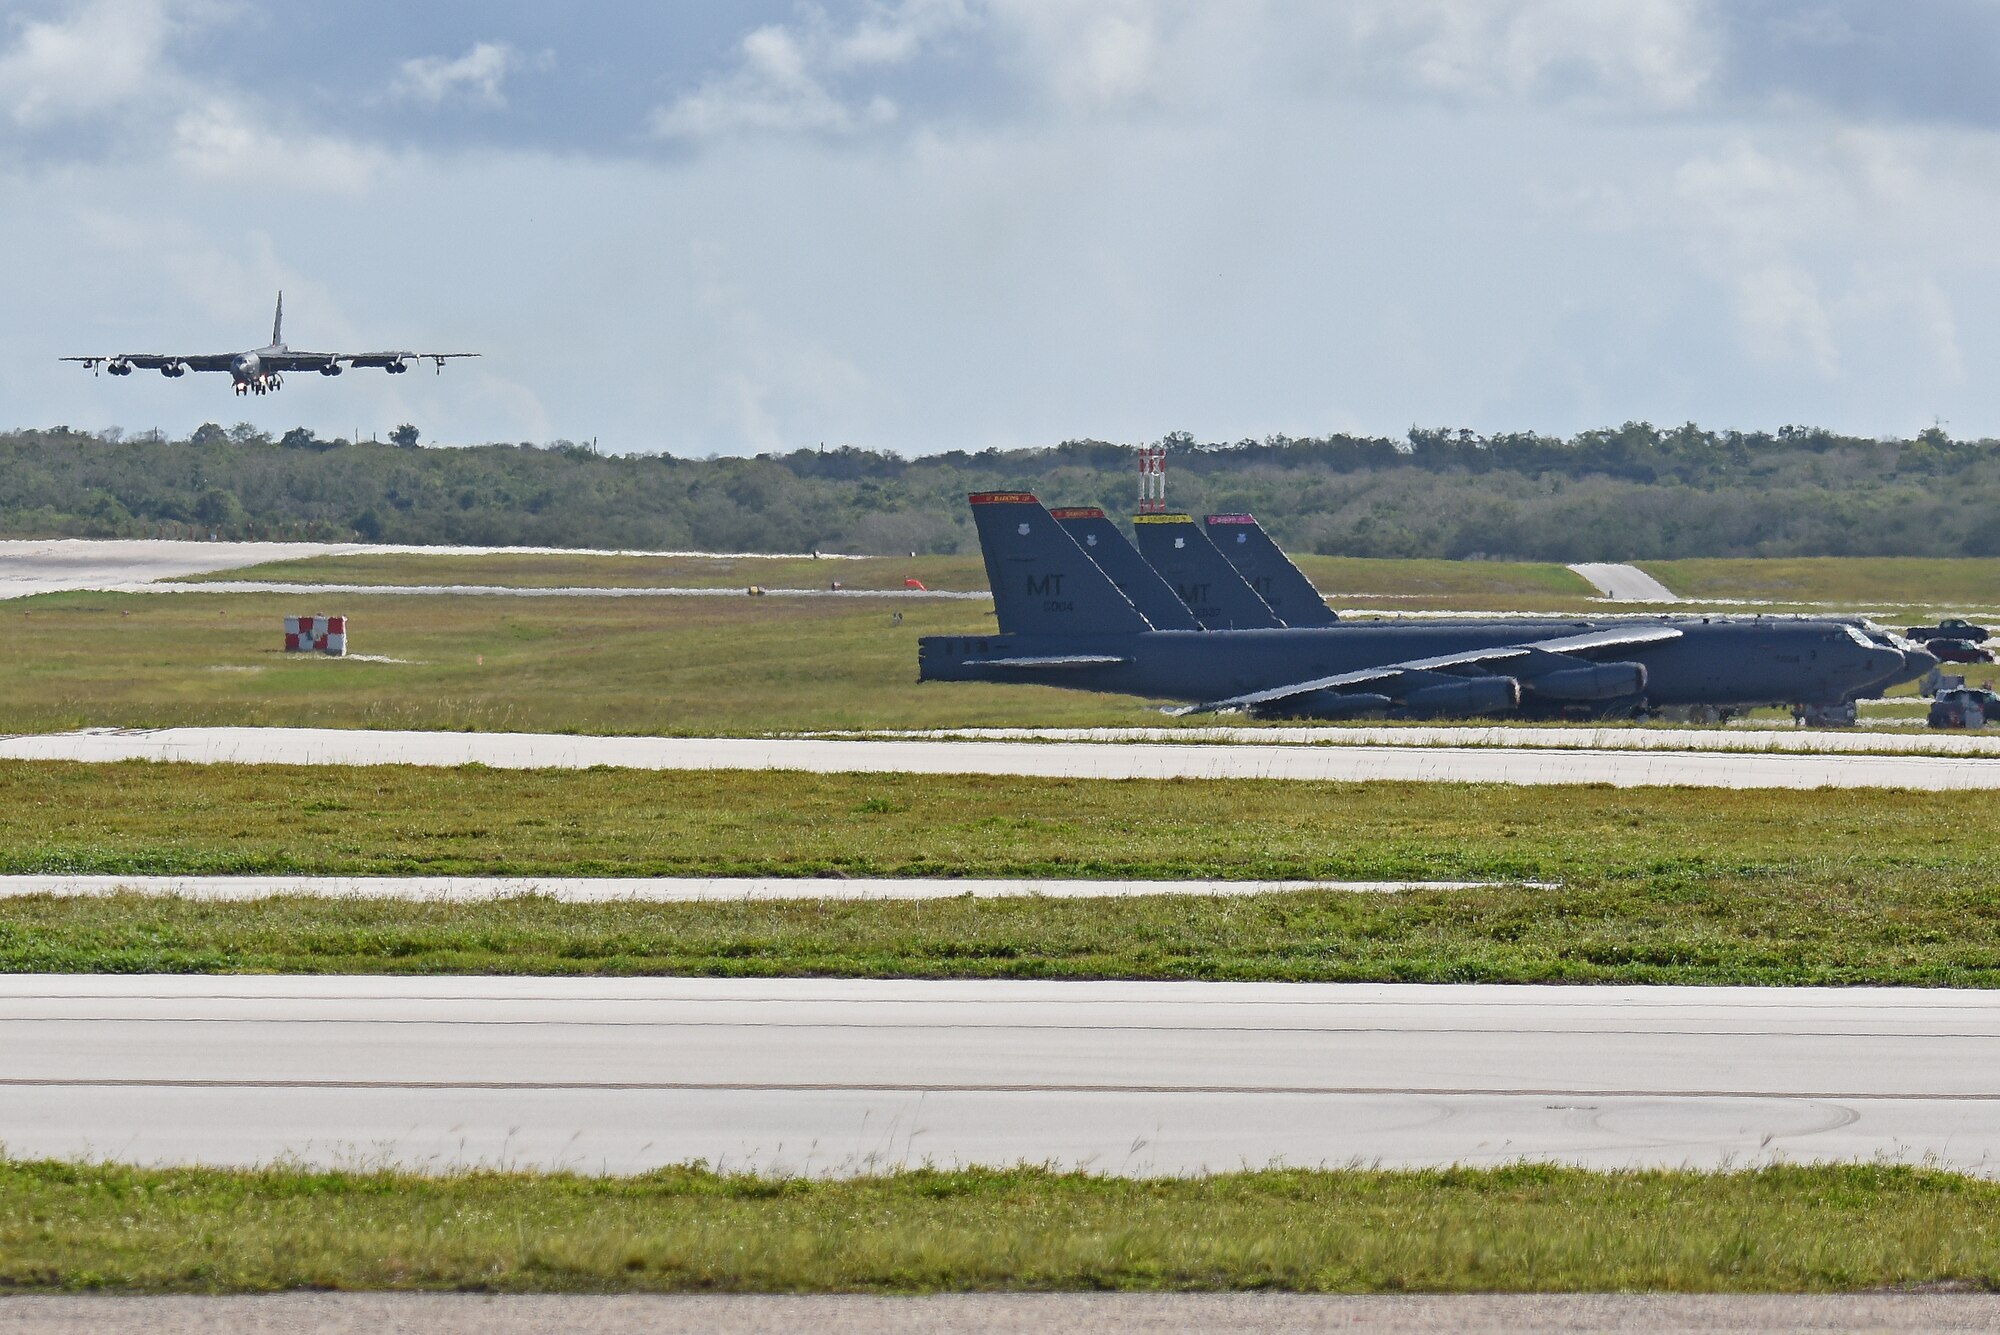 A B-52 Stratofortress from the 69th Expeditionary Bomb Squadron, deployed from Minot Air Force Base, North Dakota, lands July 12, 2019, at Andersen Air Force Base, Guam.